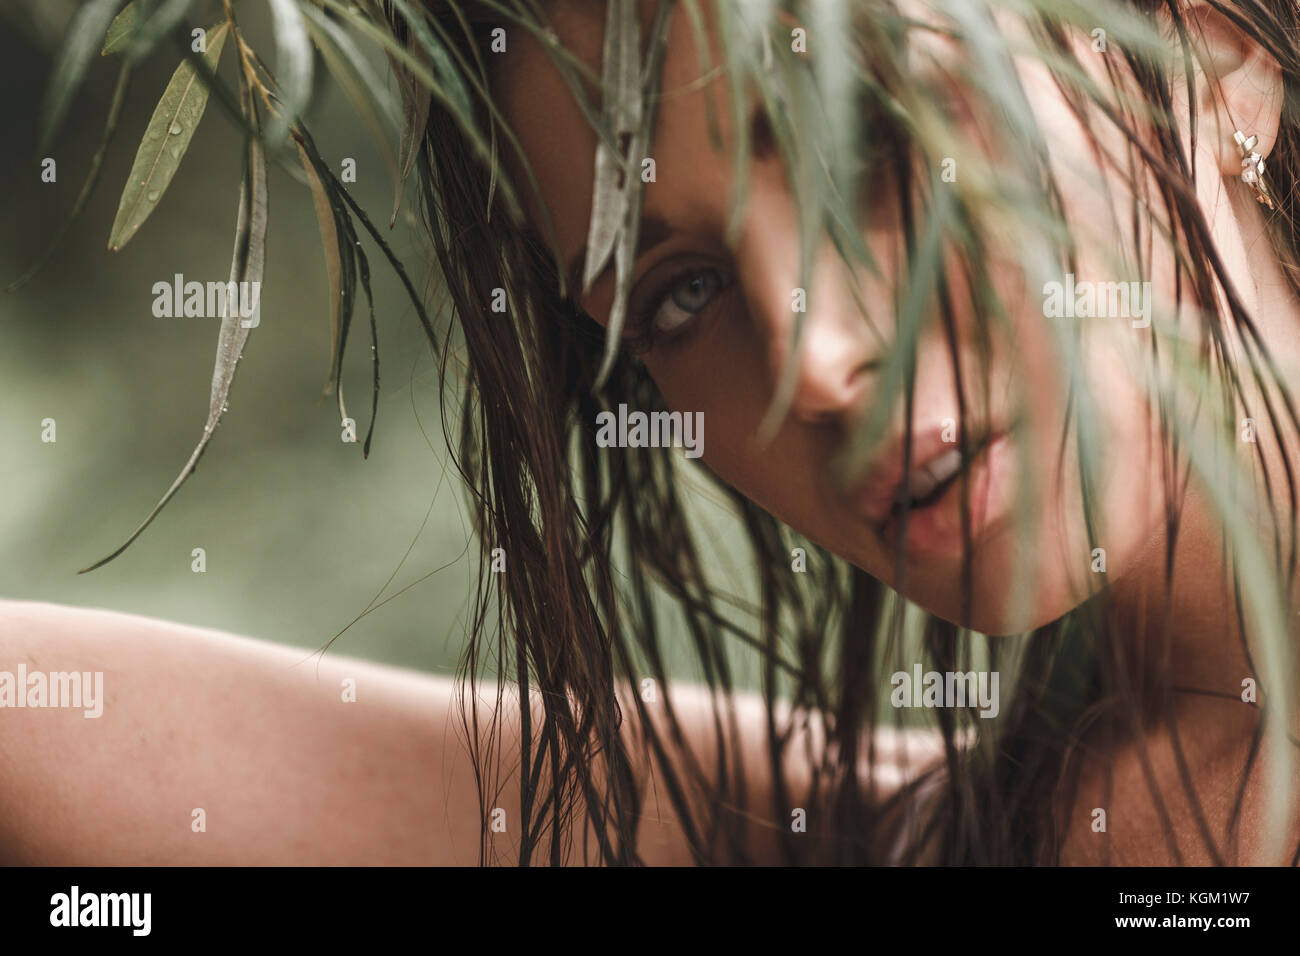 Close-up portrait of young woman with wet hair looking through leaves Stock Photo